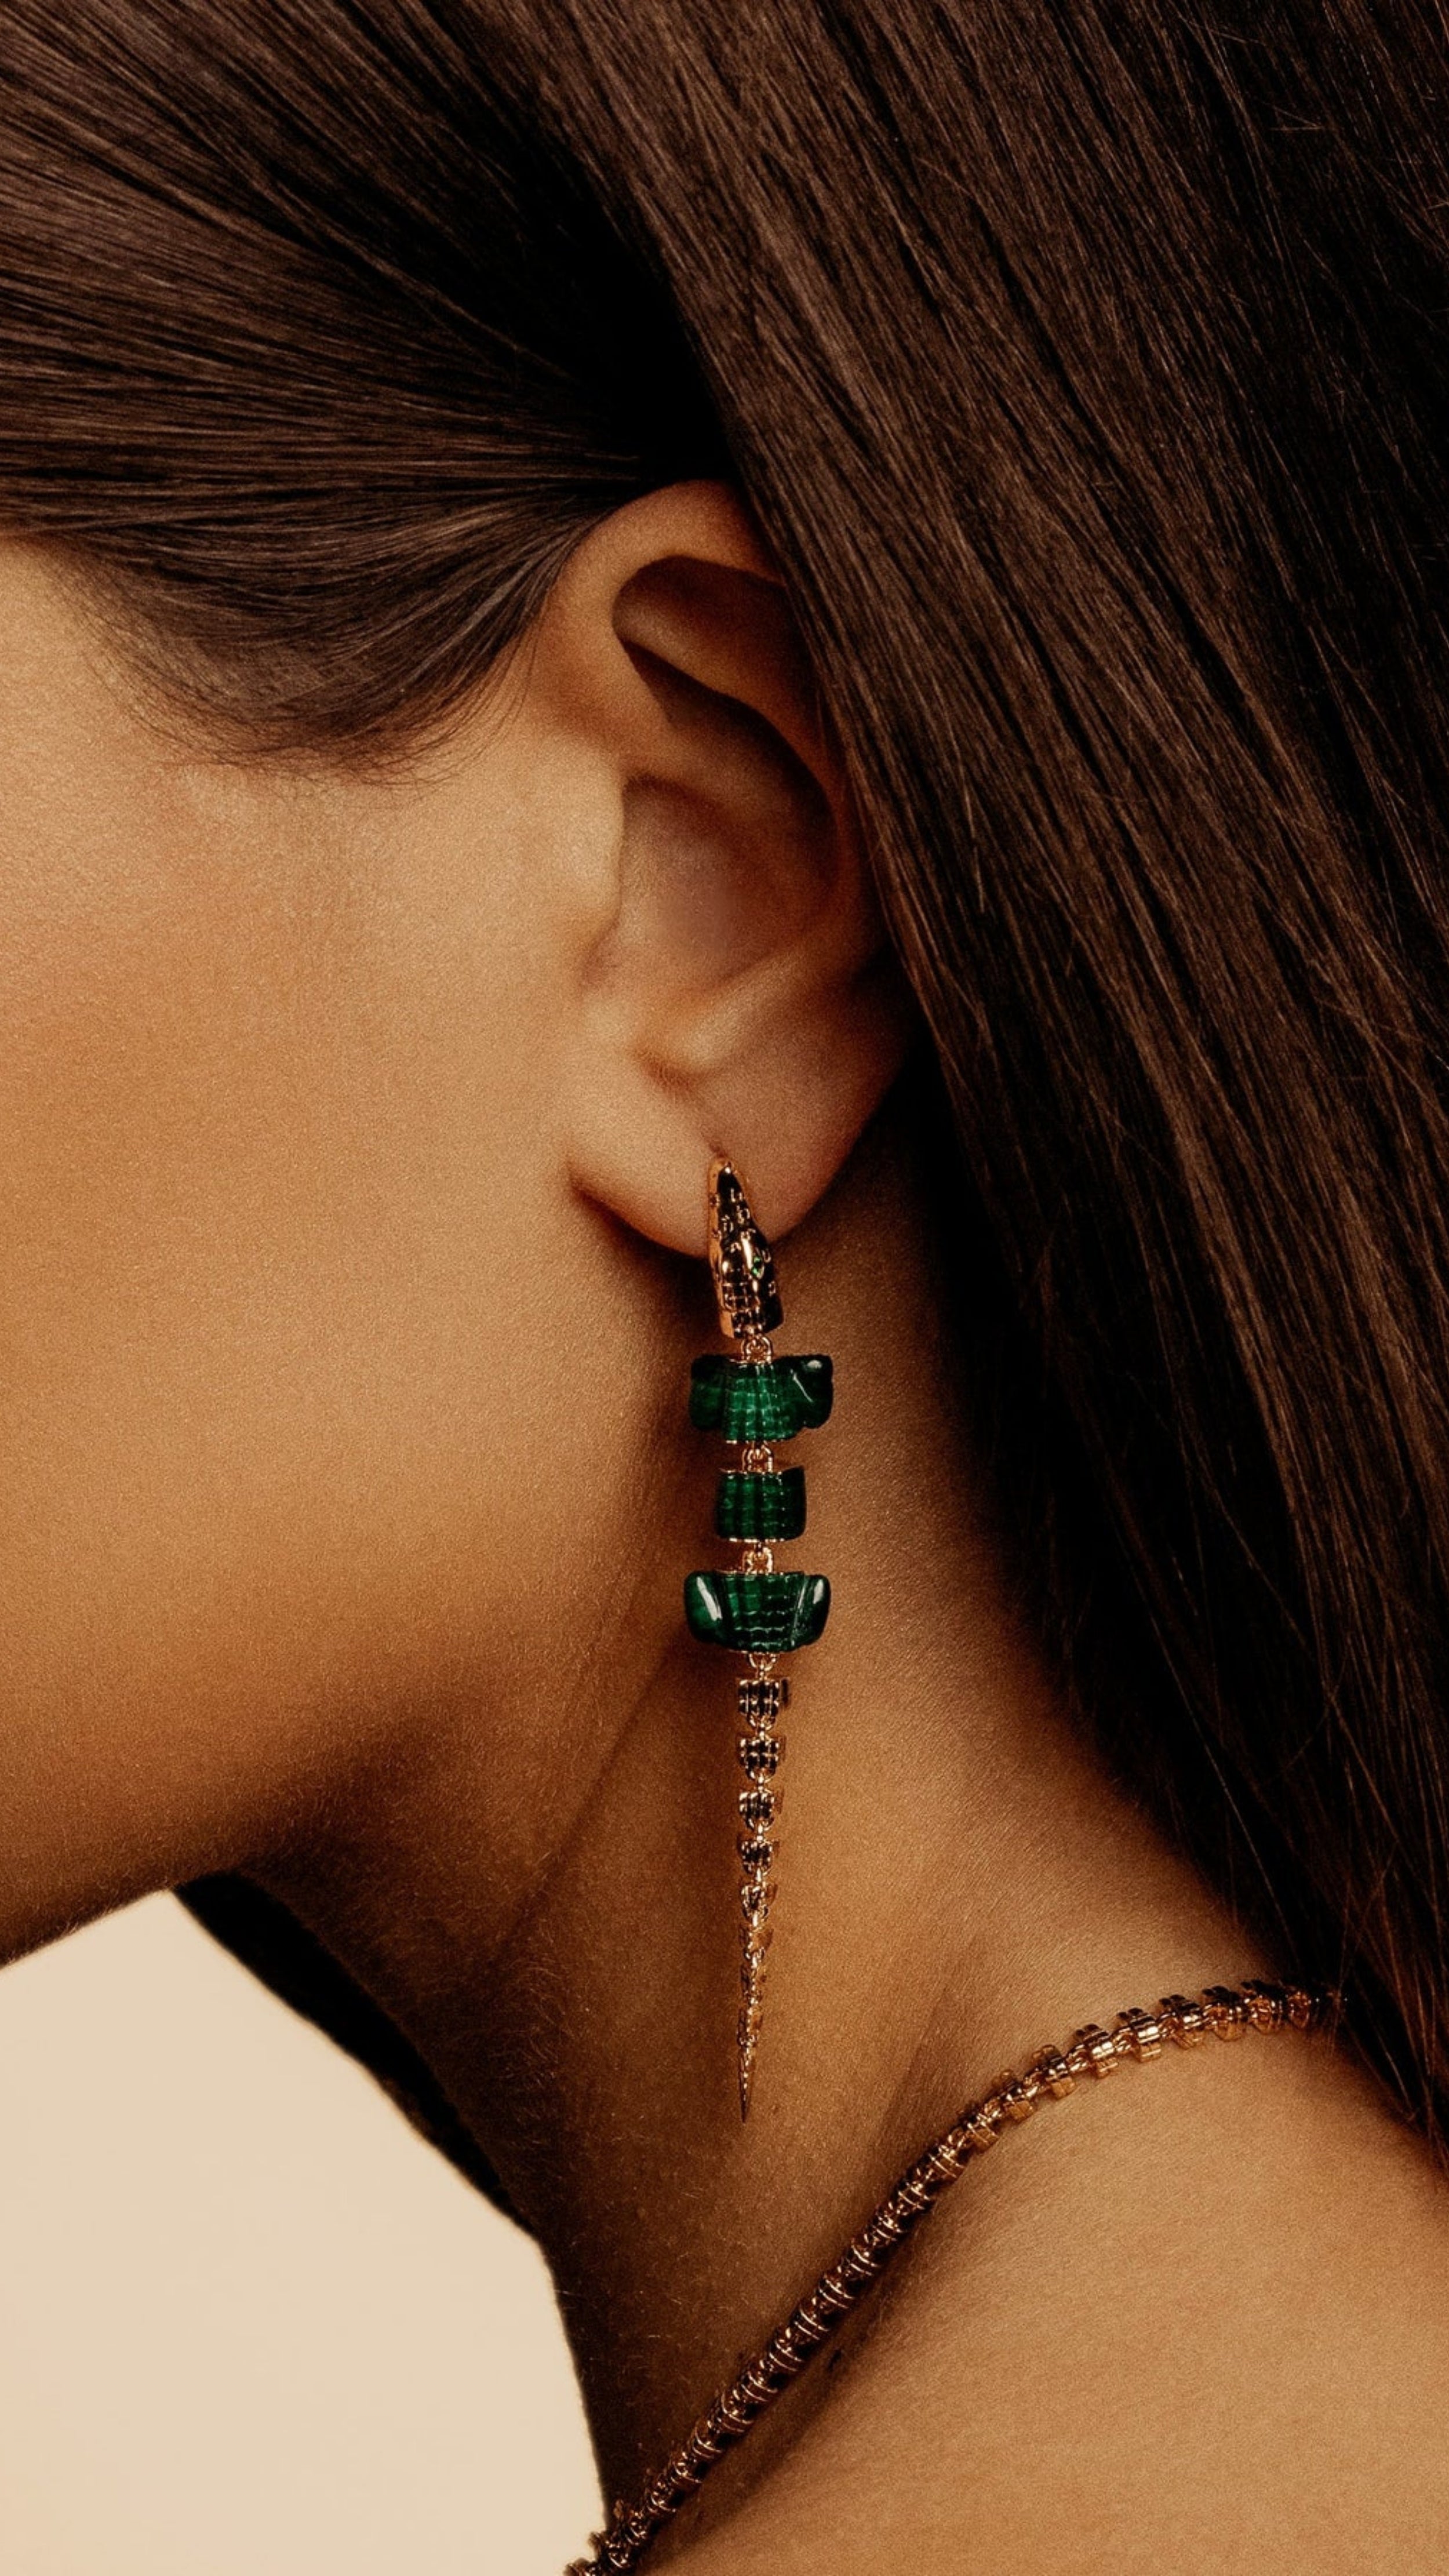 Bibi van der Velden Malachite Alligator Vertebrae Bite Single Earring. Hand-crafted 18K yellow gold earring with spine of the alligator and lifelike malachite body with Tsavorite accents. It has a unique bite clasp and moving tail. Shown on model.